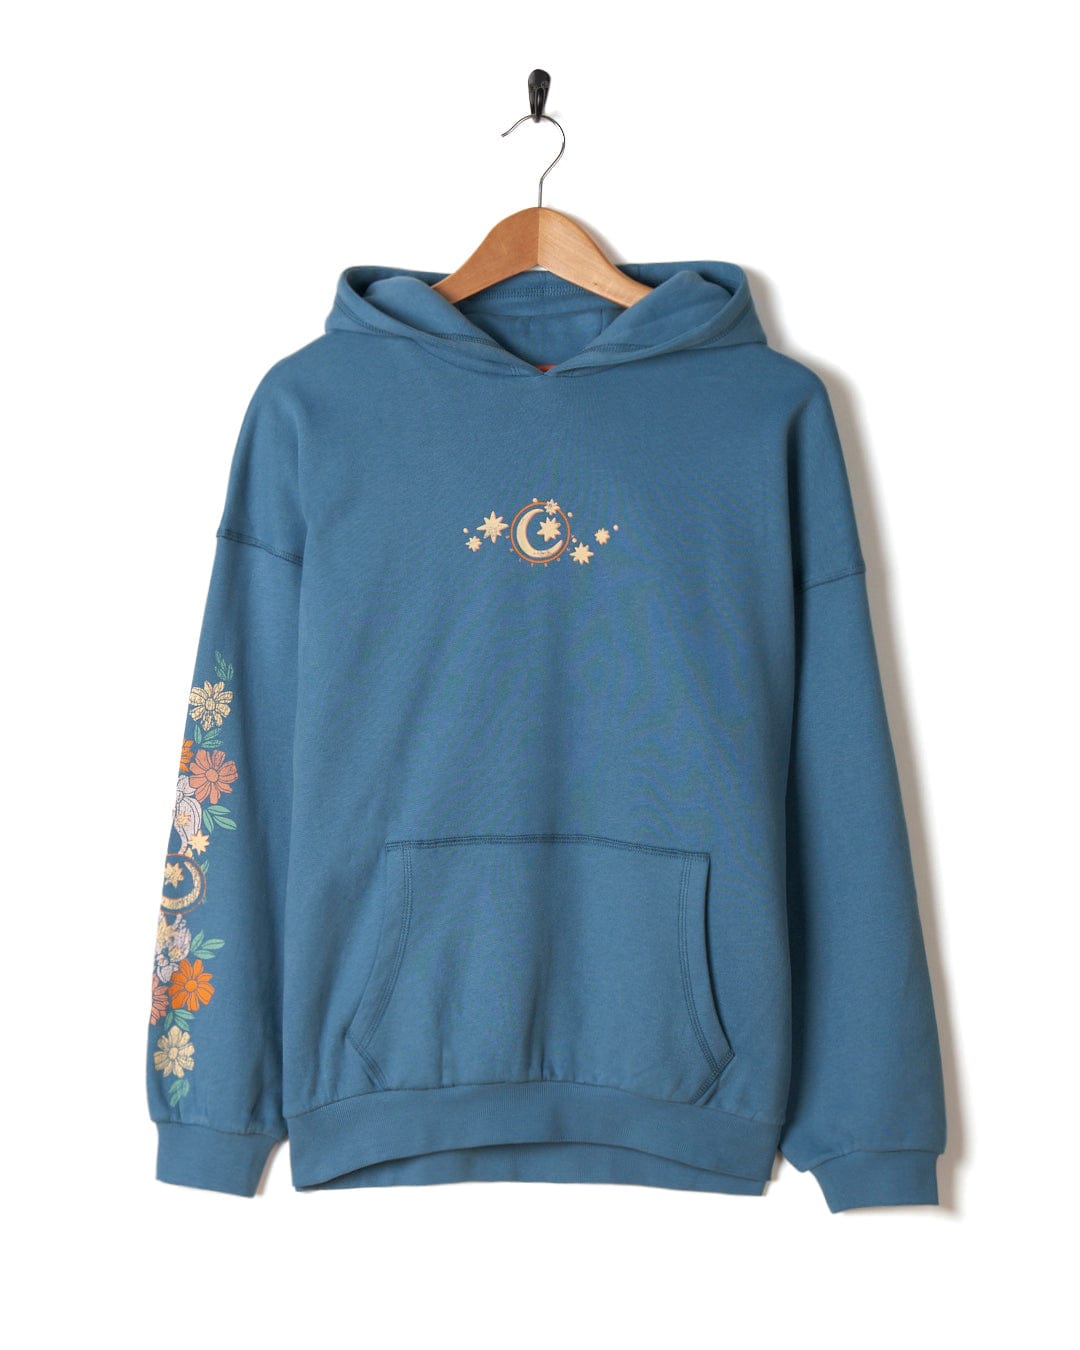 A Better Days - Womens Pop Hoodie - Blue with Luna sleeve designs and a celestial motif on the chest, hanging on a wooden hanger against a white background. (Saltrock)